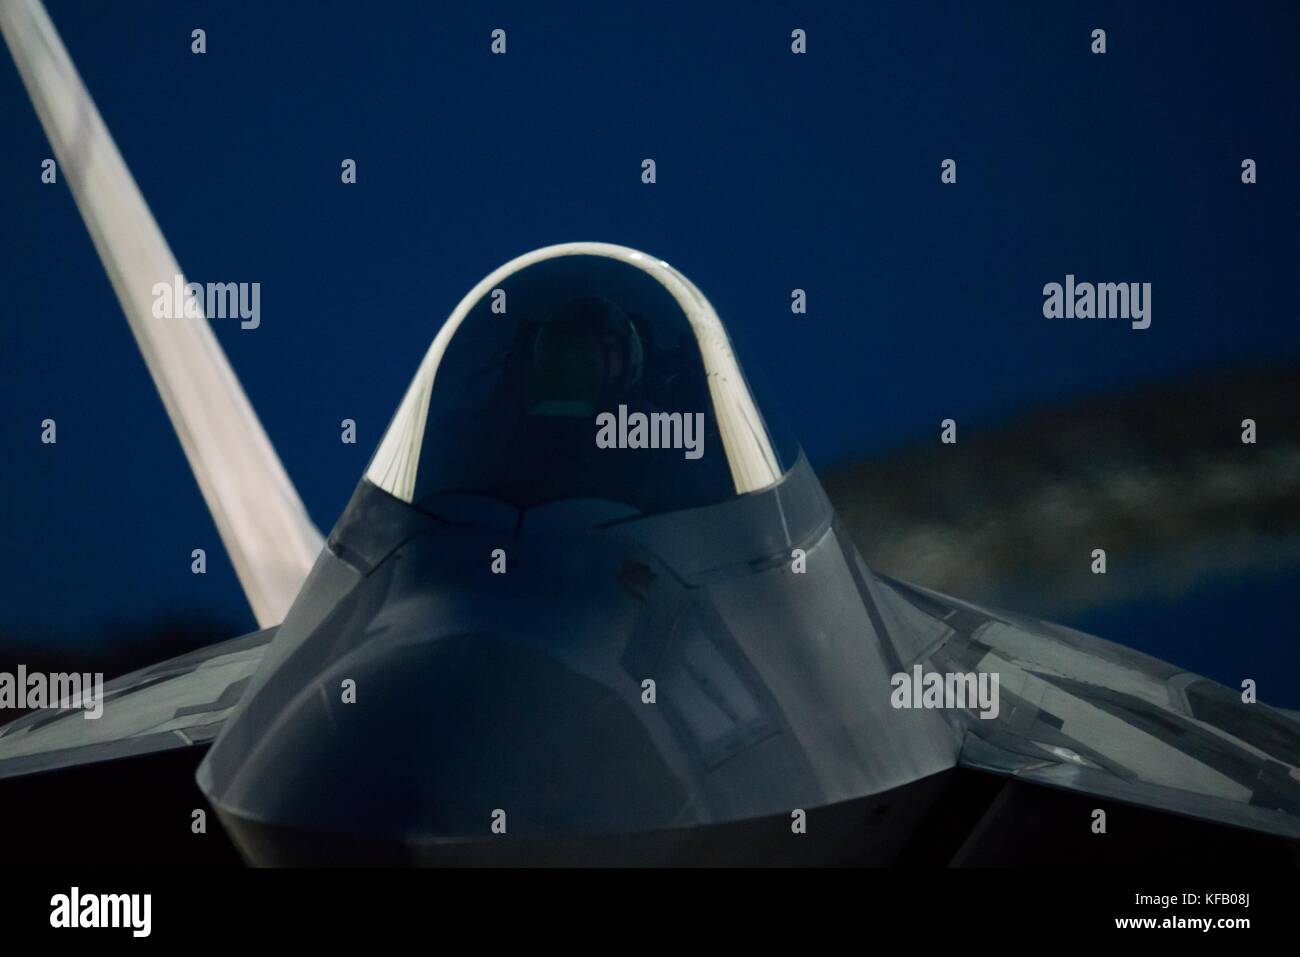 A U.S. Air Force F-22 Raptor stealth tactical fighter aircraft takes off from the runway at night at the Joint Base Langley-Eustis July 11, 2017 in Hampton, Virginia.   (photo by Benjamin Wilson via Planetpix) Stock Photo